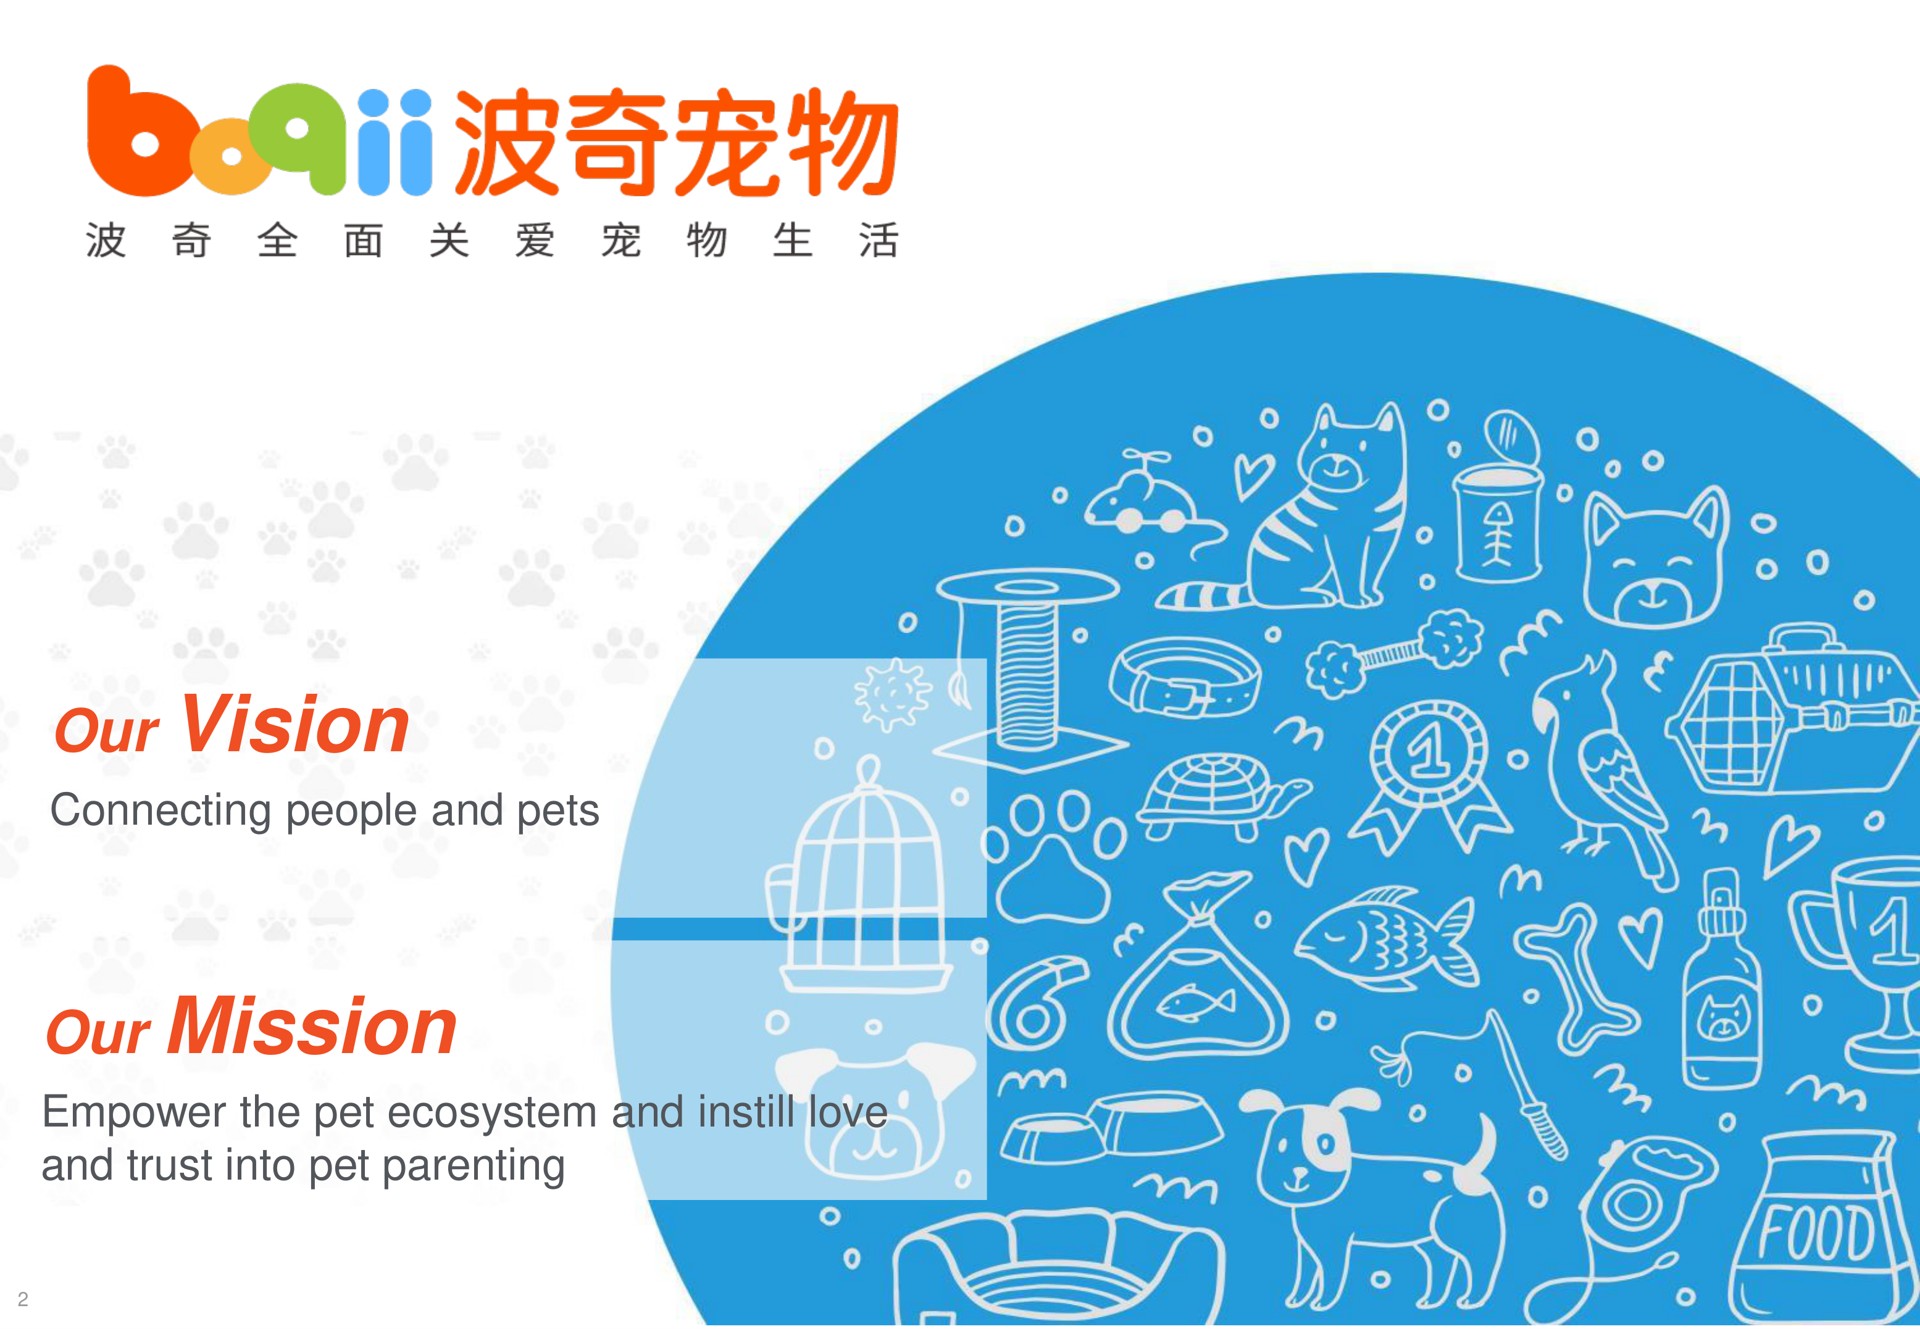 our vision connecting people and pets our mission empower the pet ecosystem and instill love and trust into pet parenting i i a a | Boqii Holding